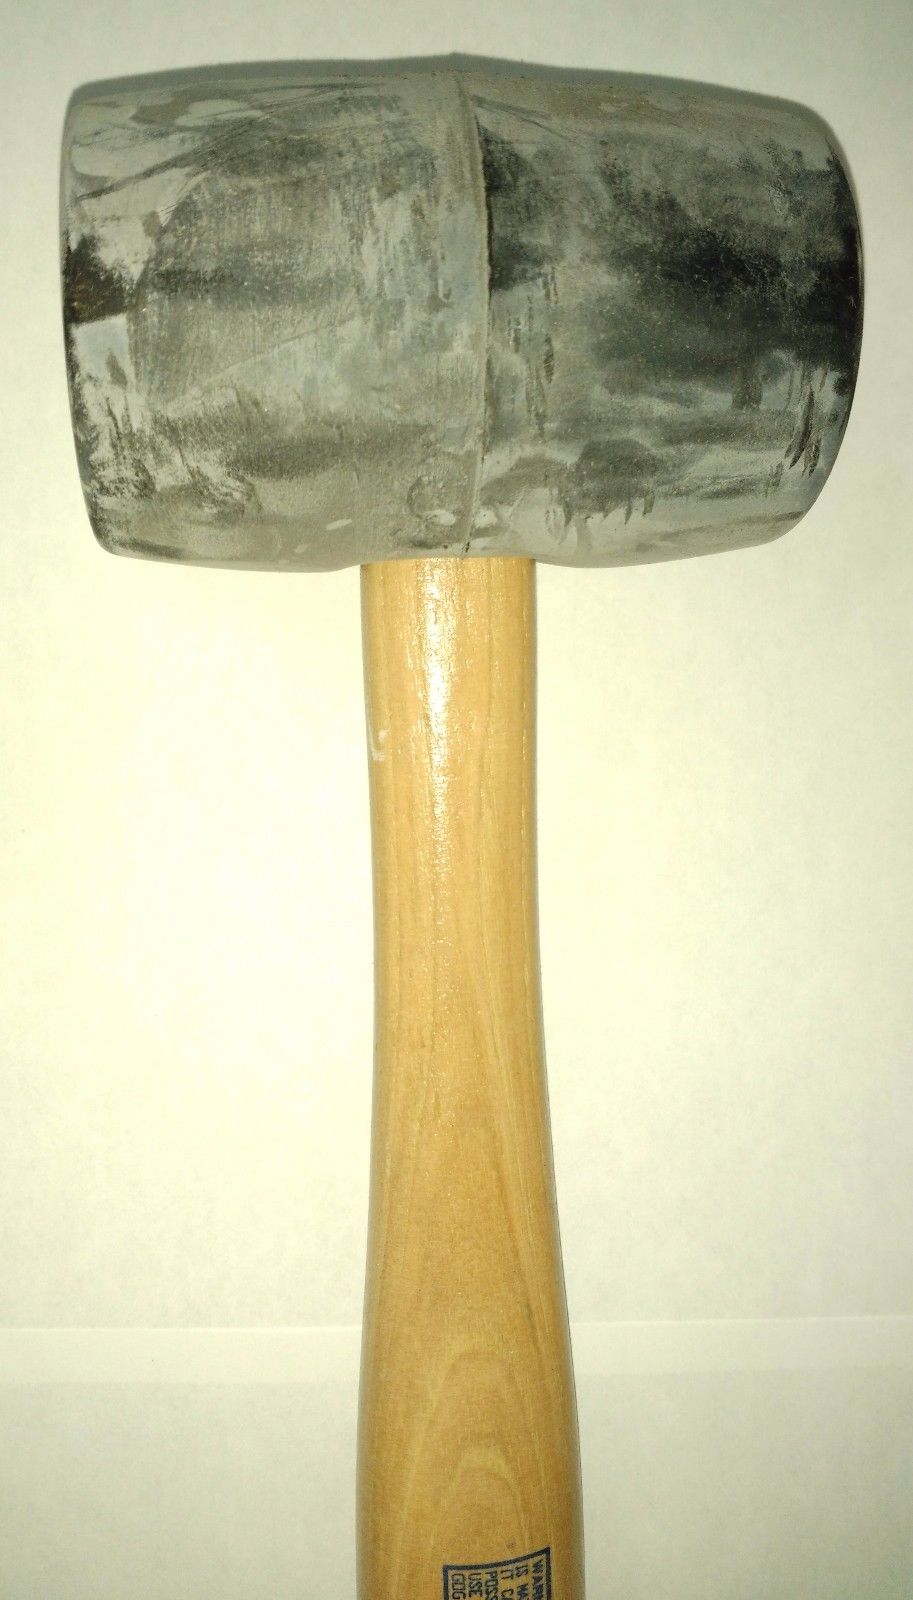 KD Tools 81220 Rubber Mallet Hammer 20 OZ USA Made